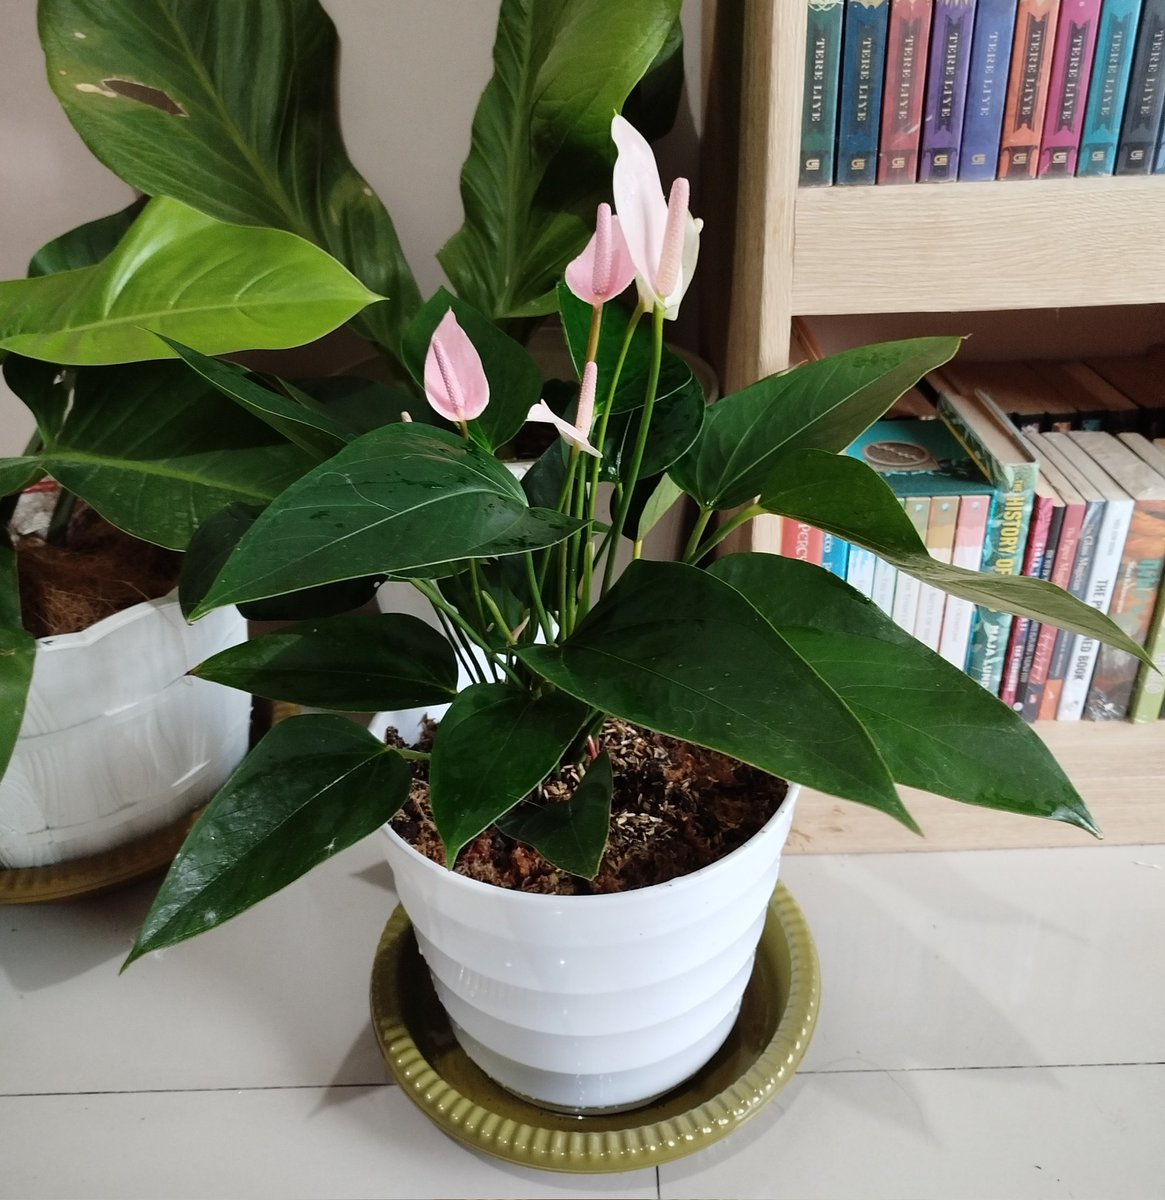 have been searching for medium sized of pink anthurium for a long time, pretty 💖